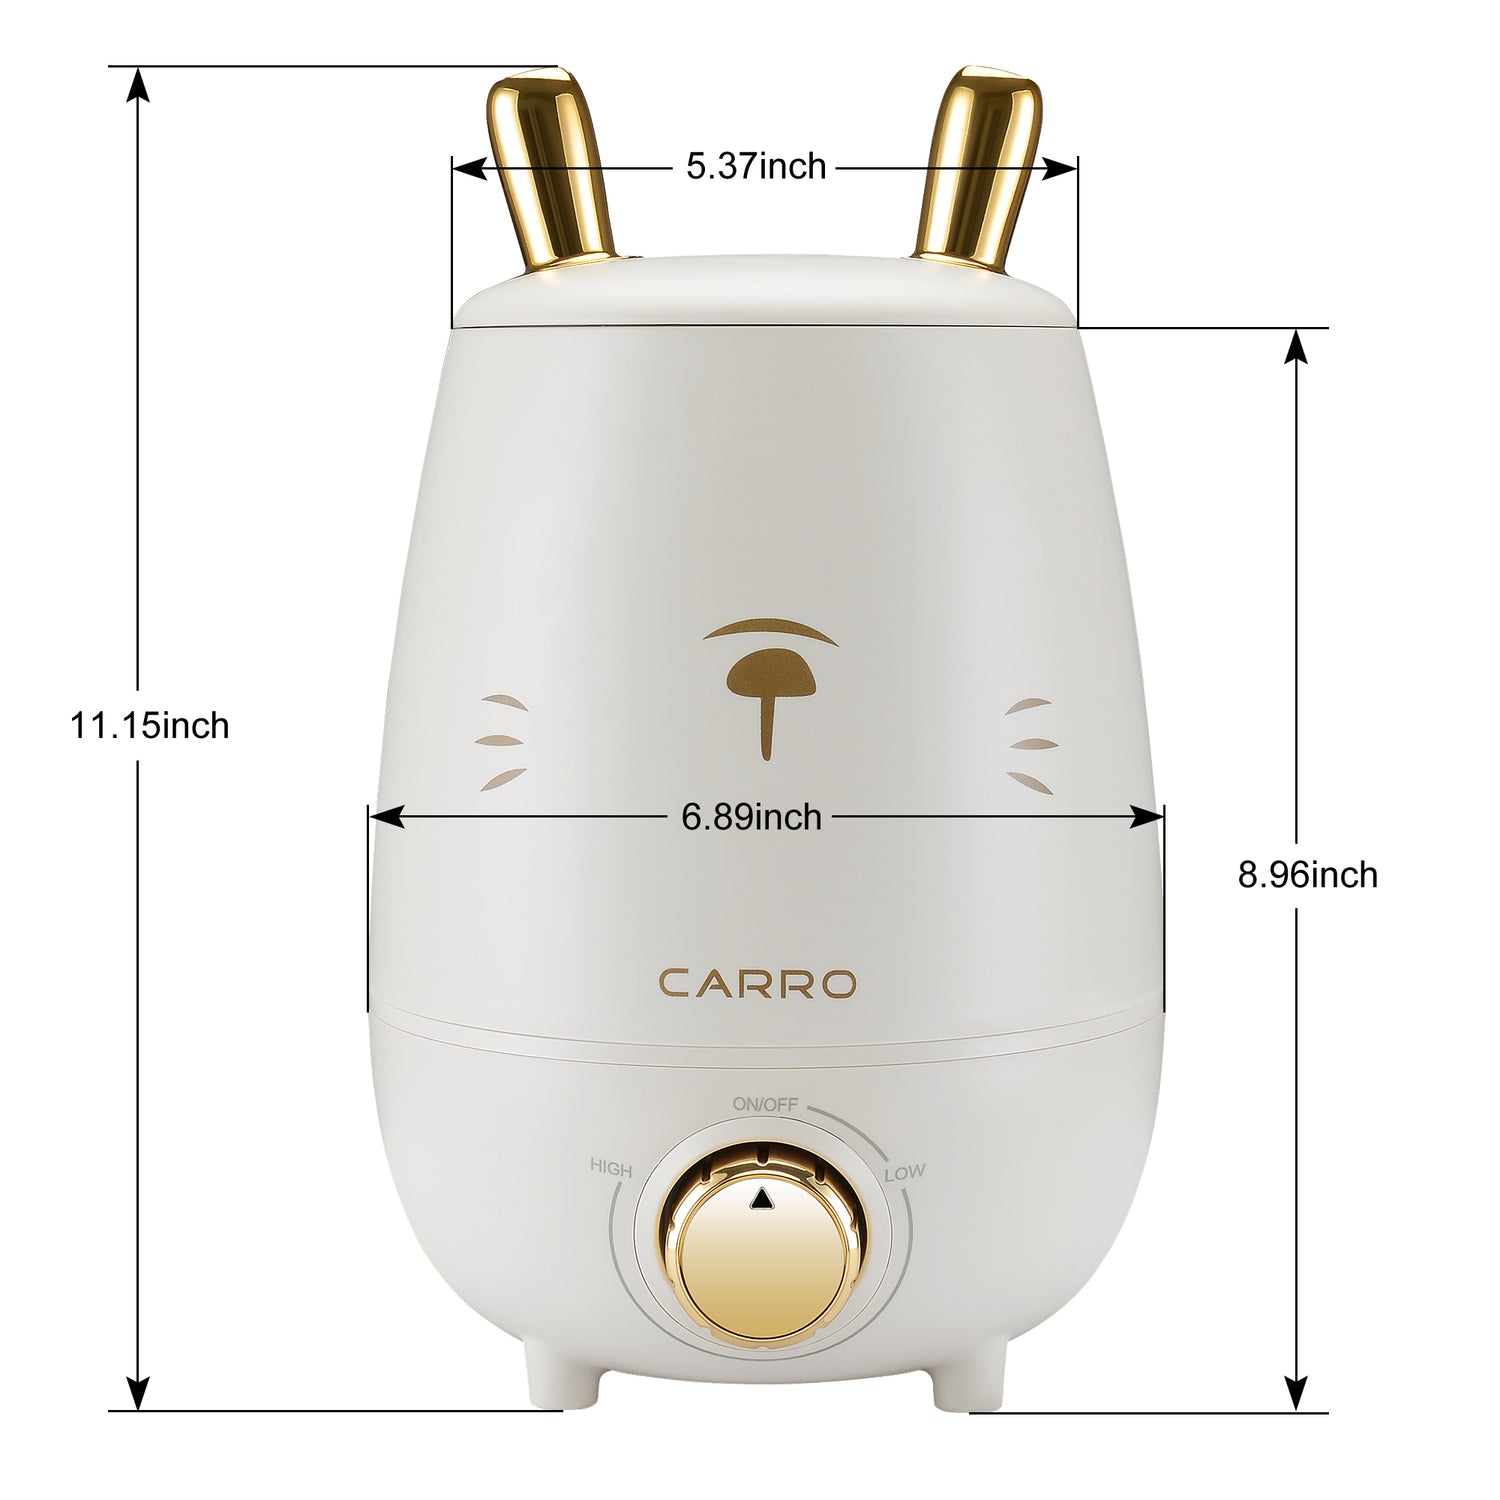 The humidifier is equipped with double lovely bunny-ear-shape Atomization Outlets and variable mist control rotary switch. A low water indicator light lets you know when it&